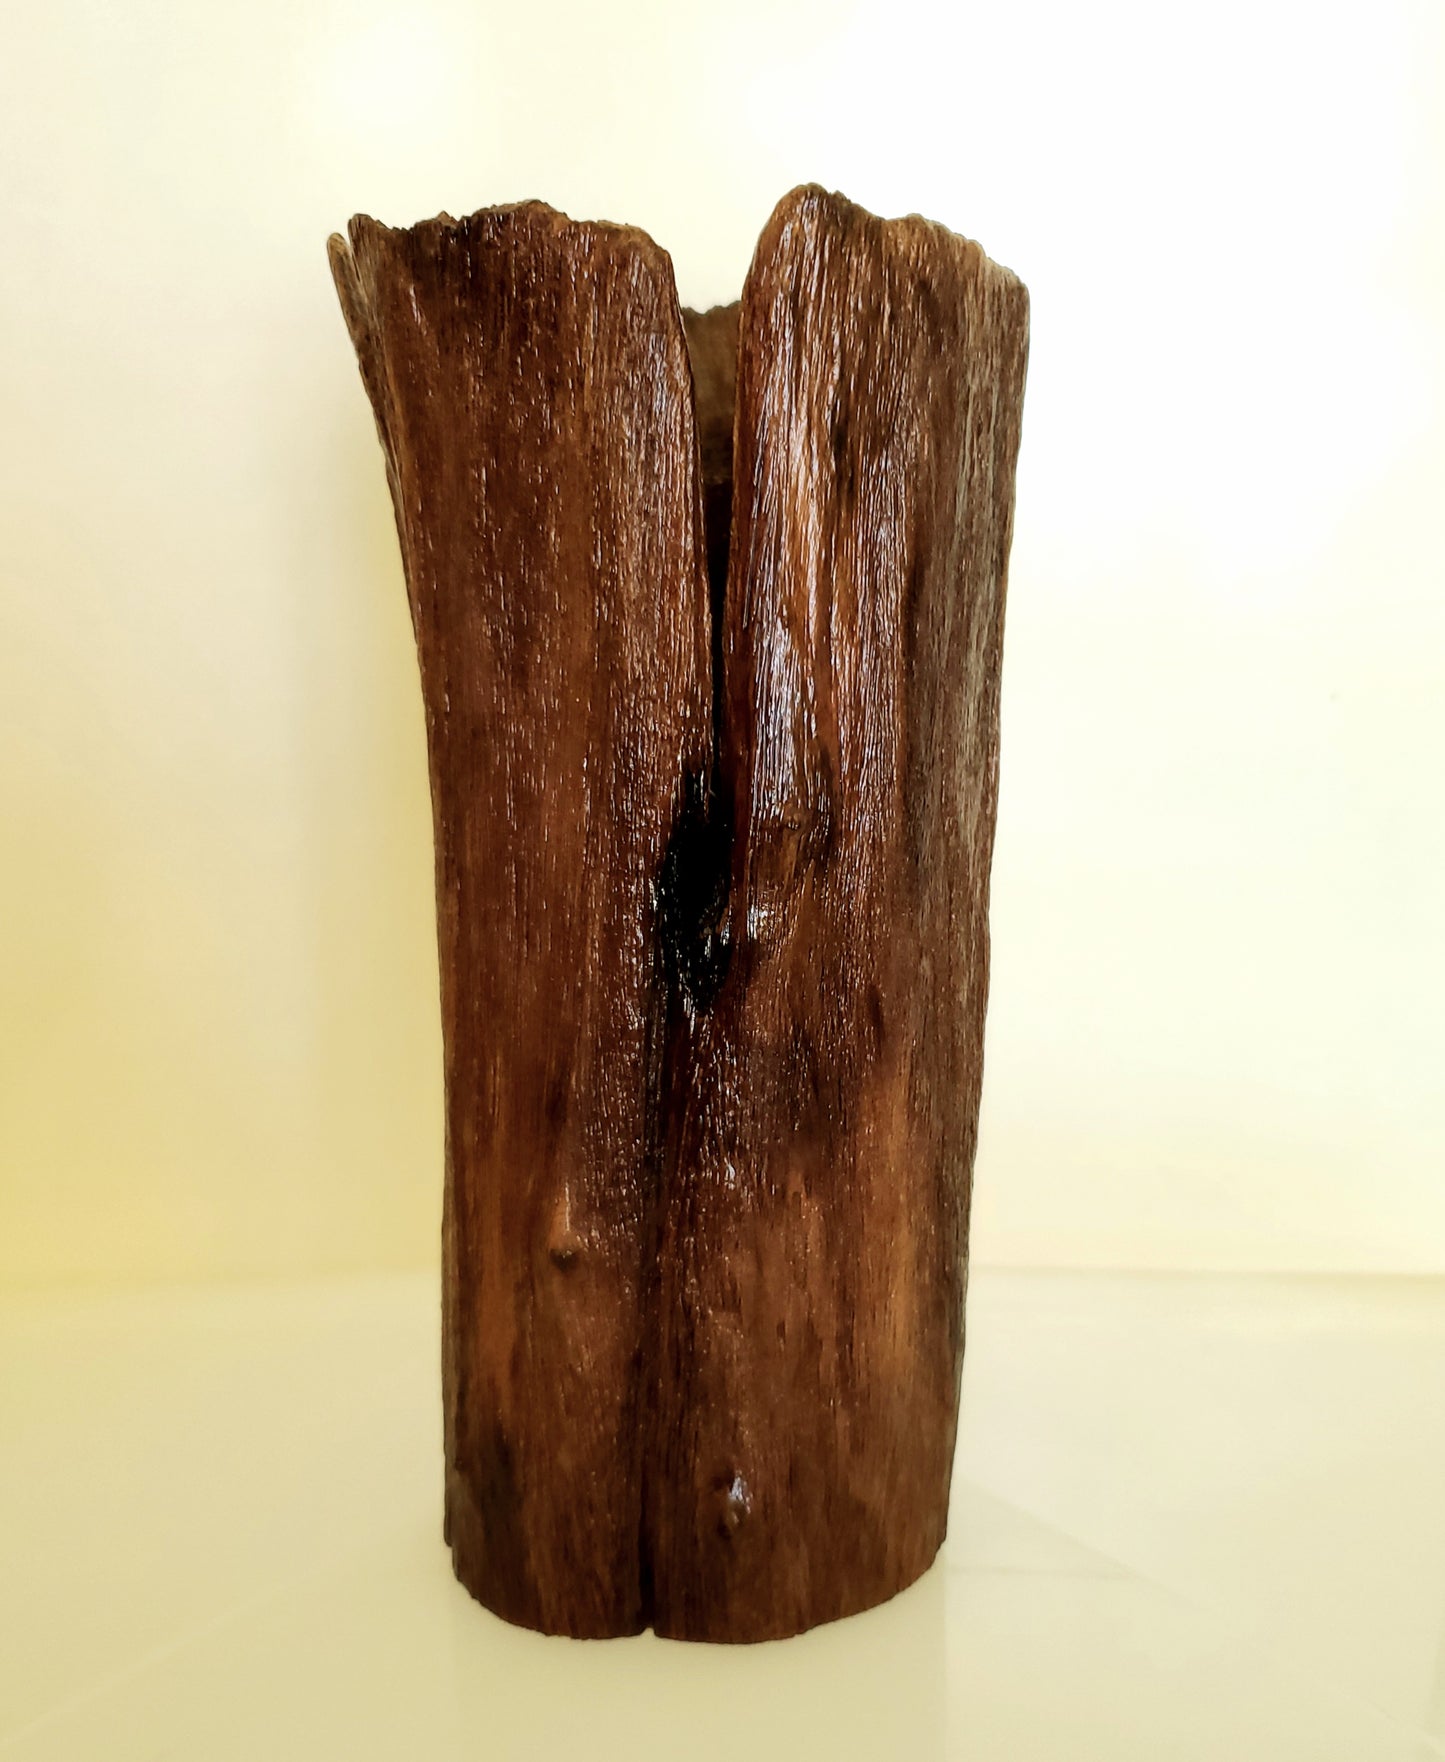 Hand Crafted Natural Branch Vase from Local Miro Wood